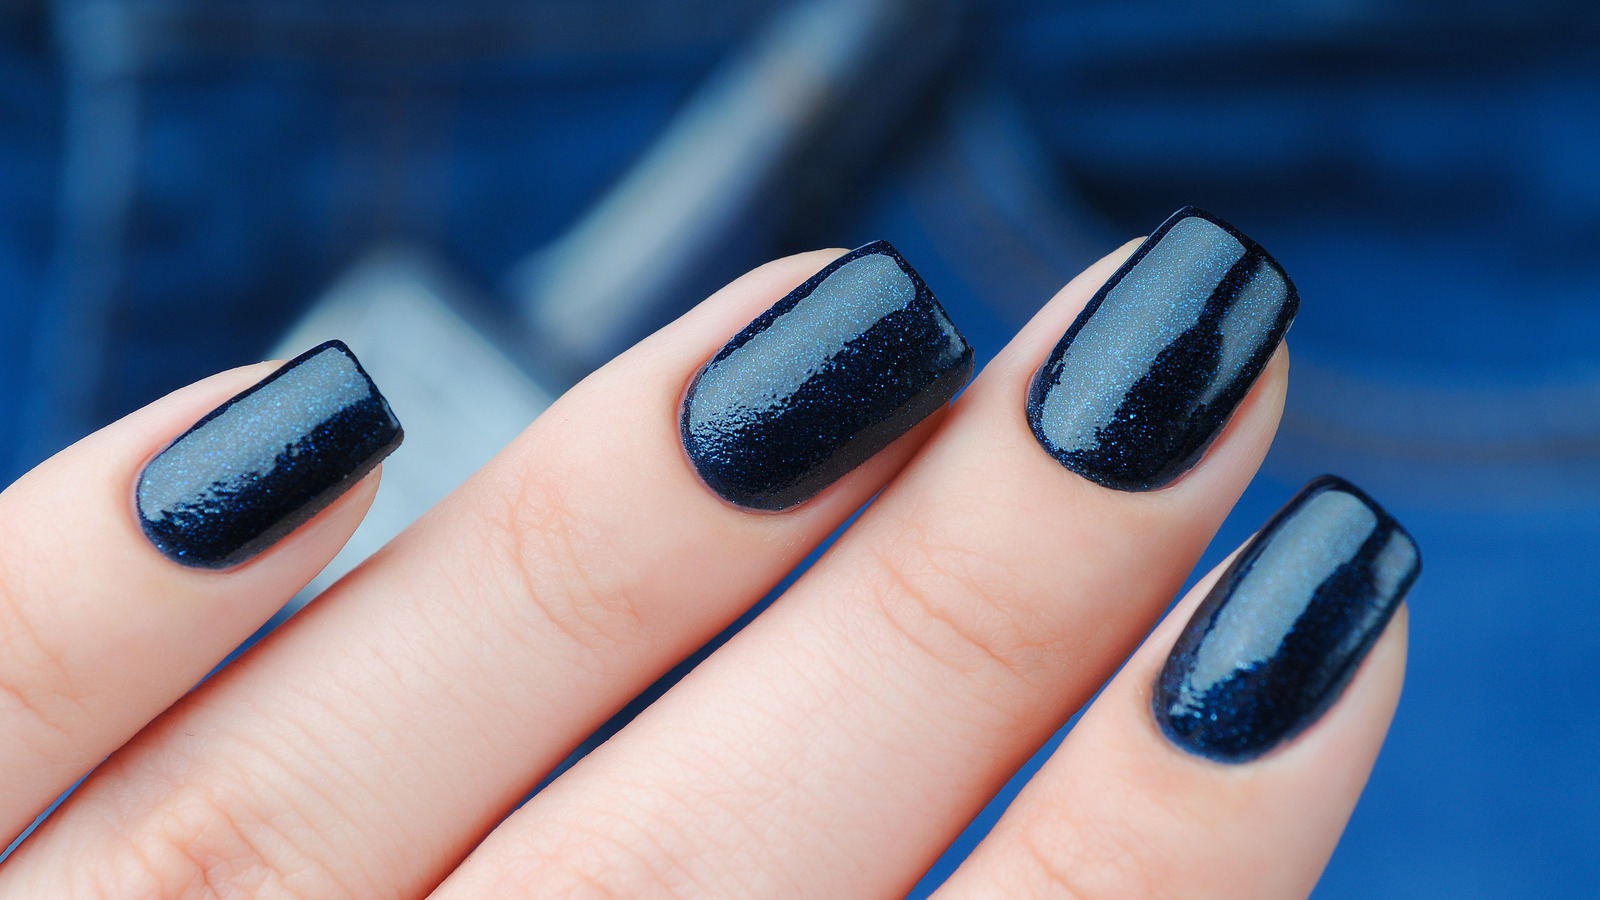 10. "The Best Winter Nail Colors for a Festive Holiday Look" - wide 6